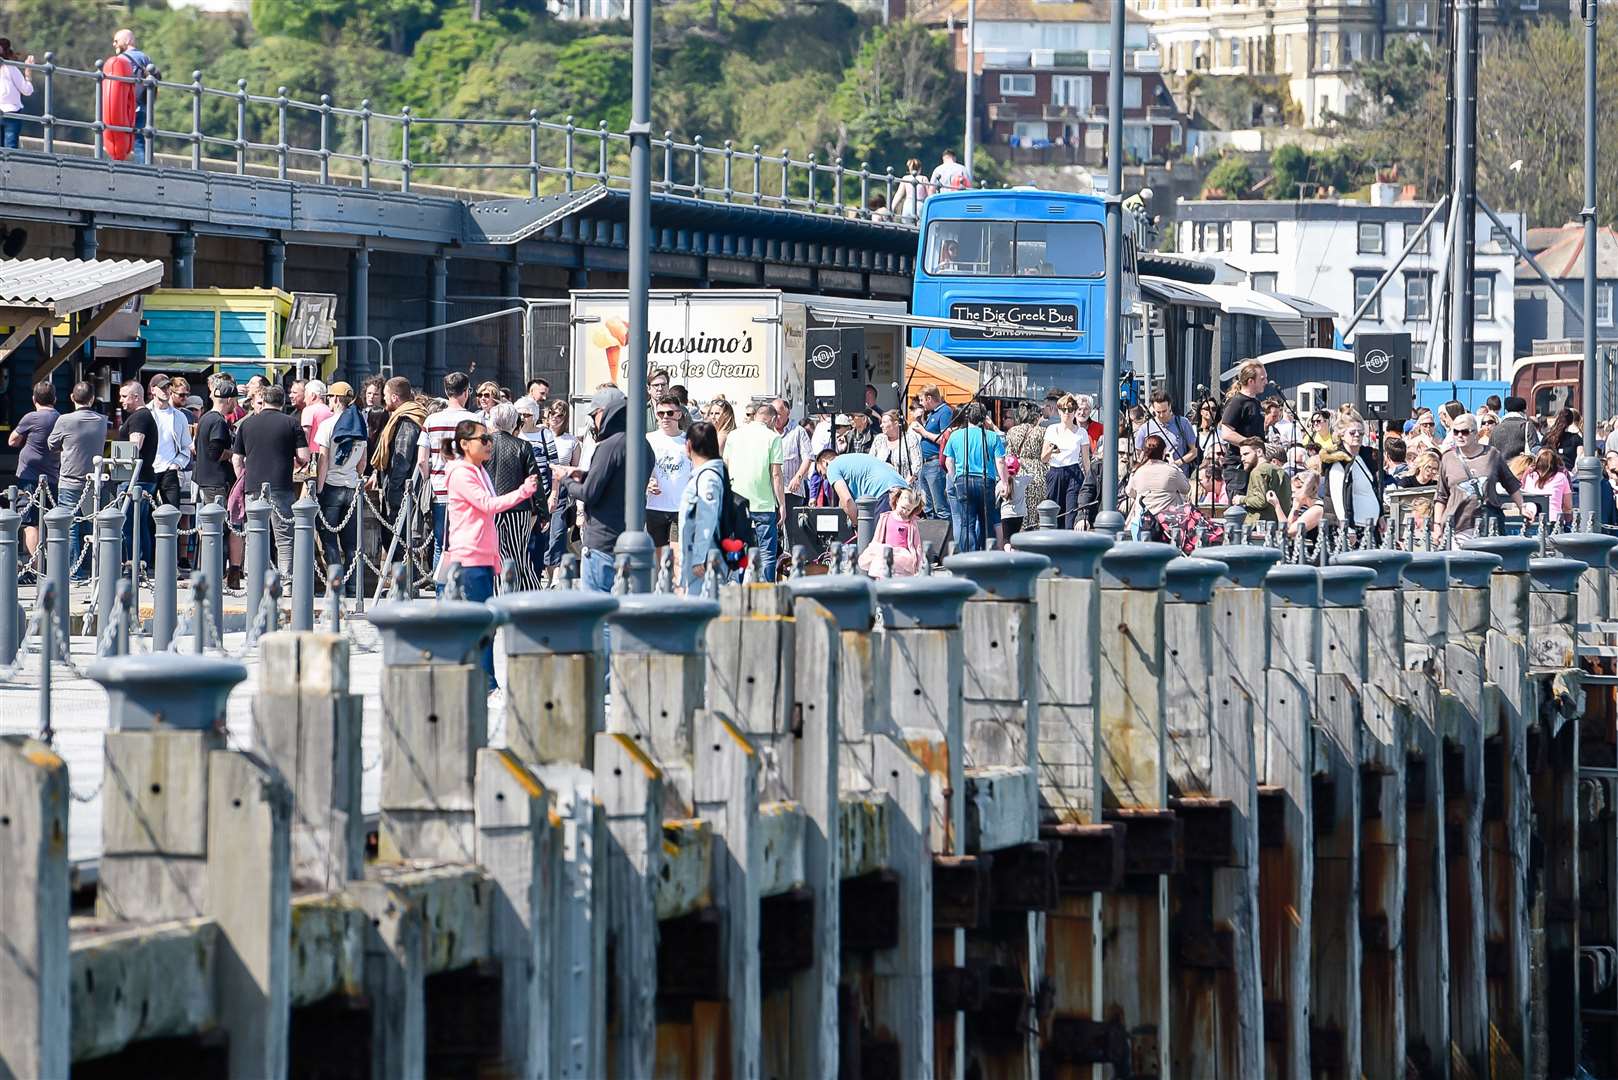 Thousands of people visit the Harbour Arm each year. Picture: Alan Langley